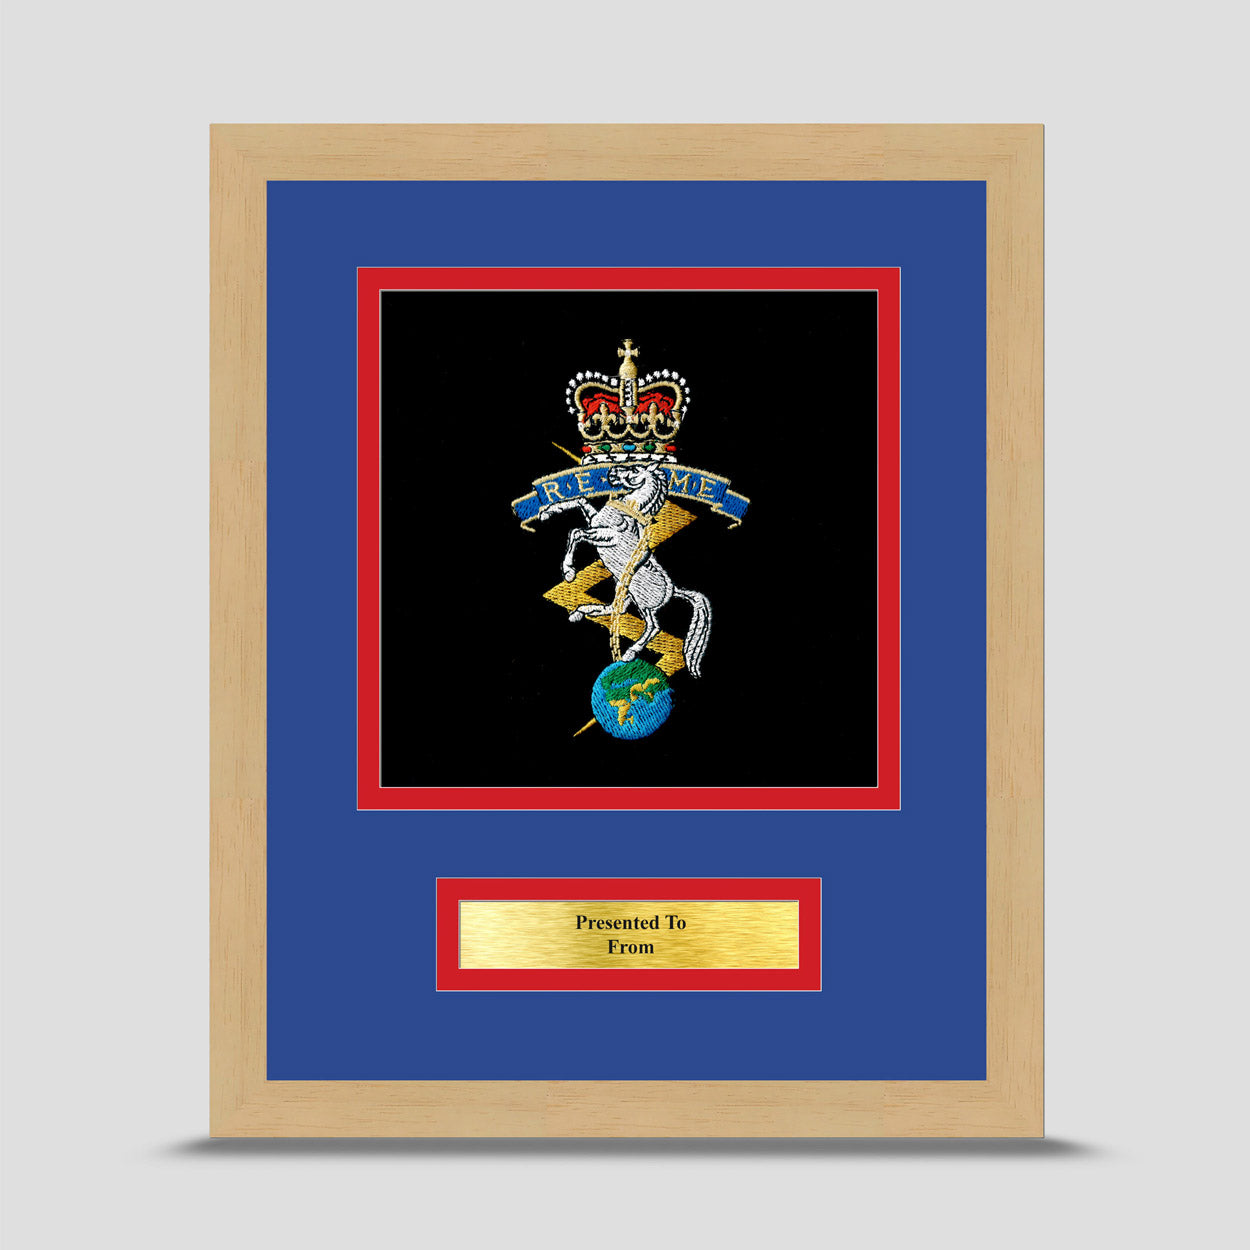 Royal Electrical Mechanical Engineers Framed Military Embroidery Presentation REME